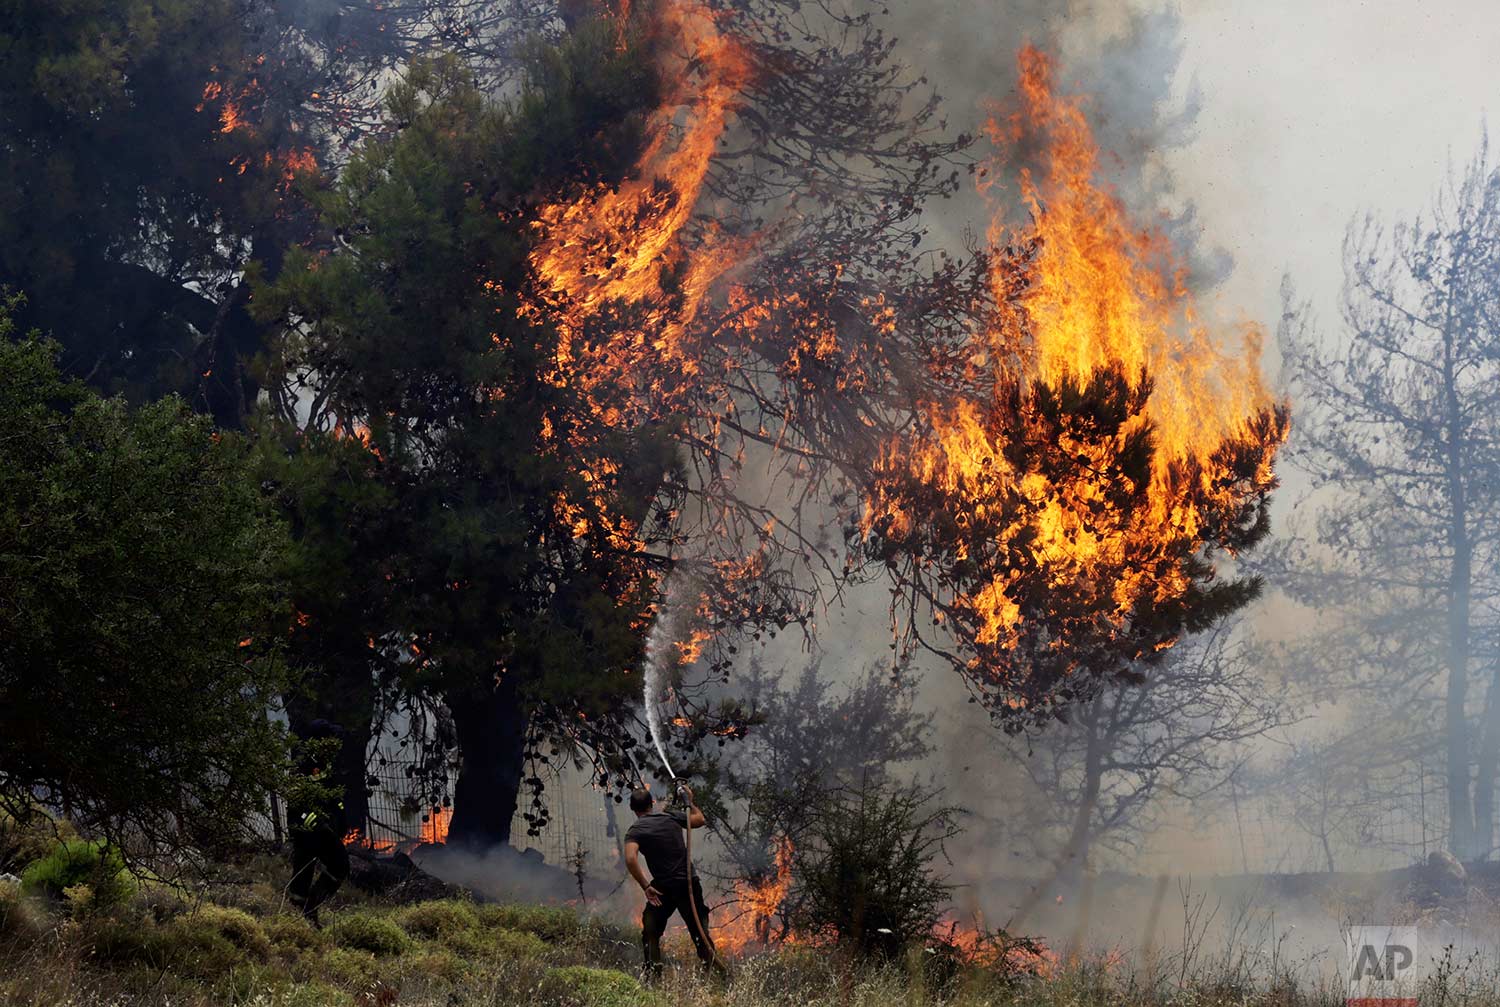  A volunteer tries to extinguish burning trees during a forest fire near Kapandriti, Greece, north of Athens, Tuesday, Aug. 15, 2017.(AP Photo/Ioanna Spanou) 